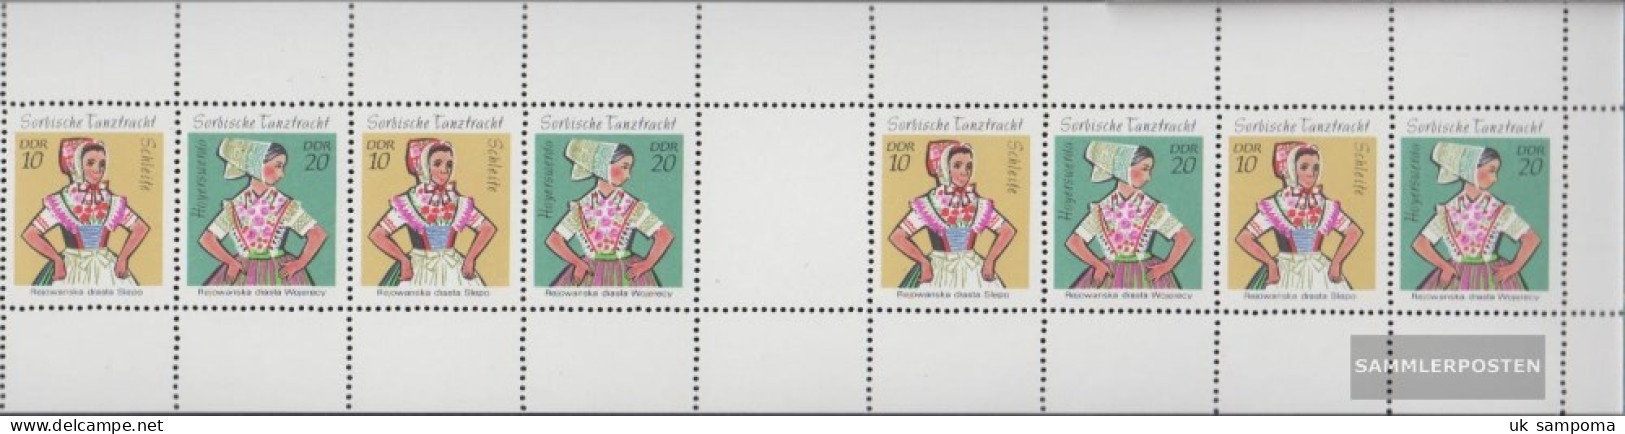 DDR MHB A13A Unmounted Mint / Never Hinged 1971 Sorbian Costumes - Unused Stamps